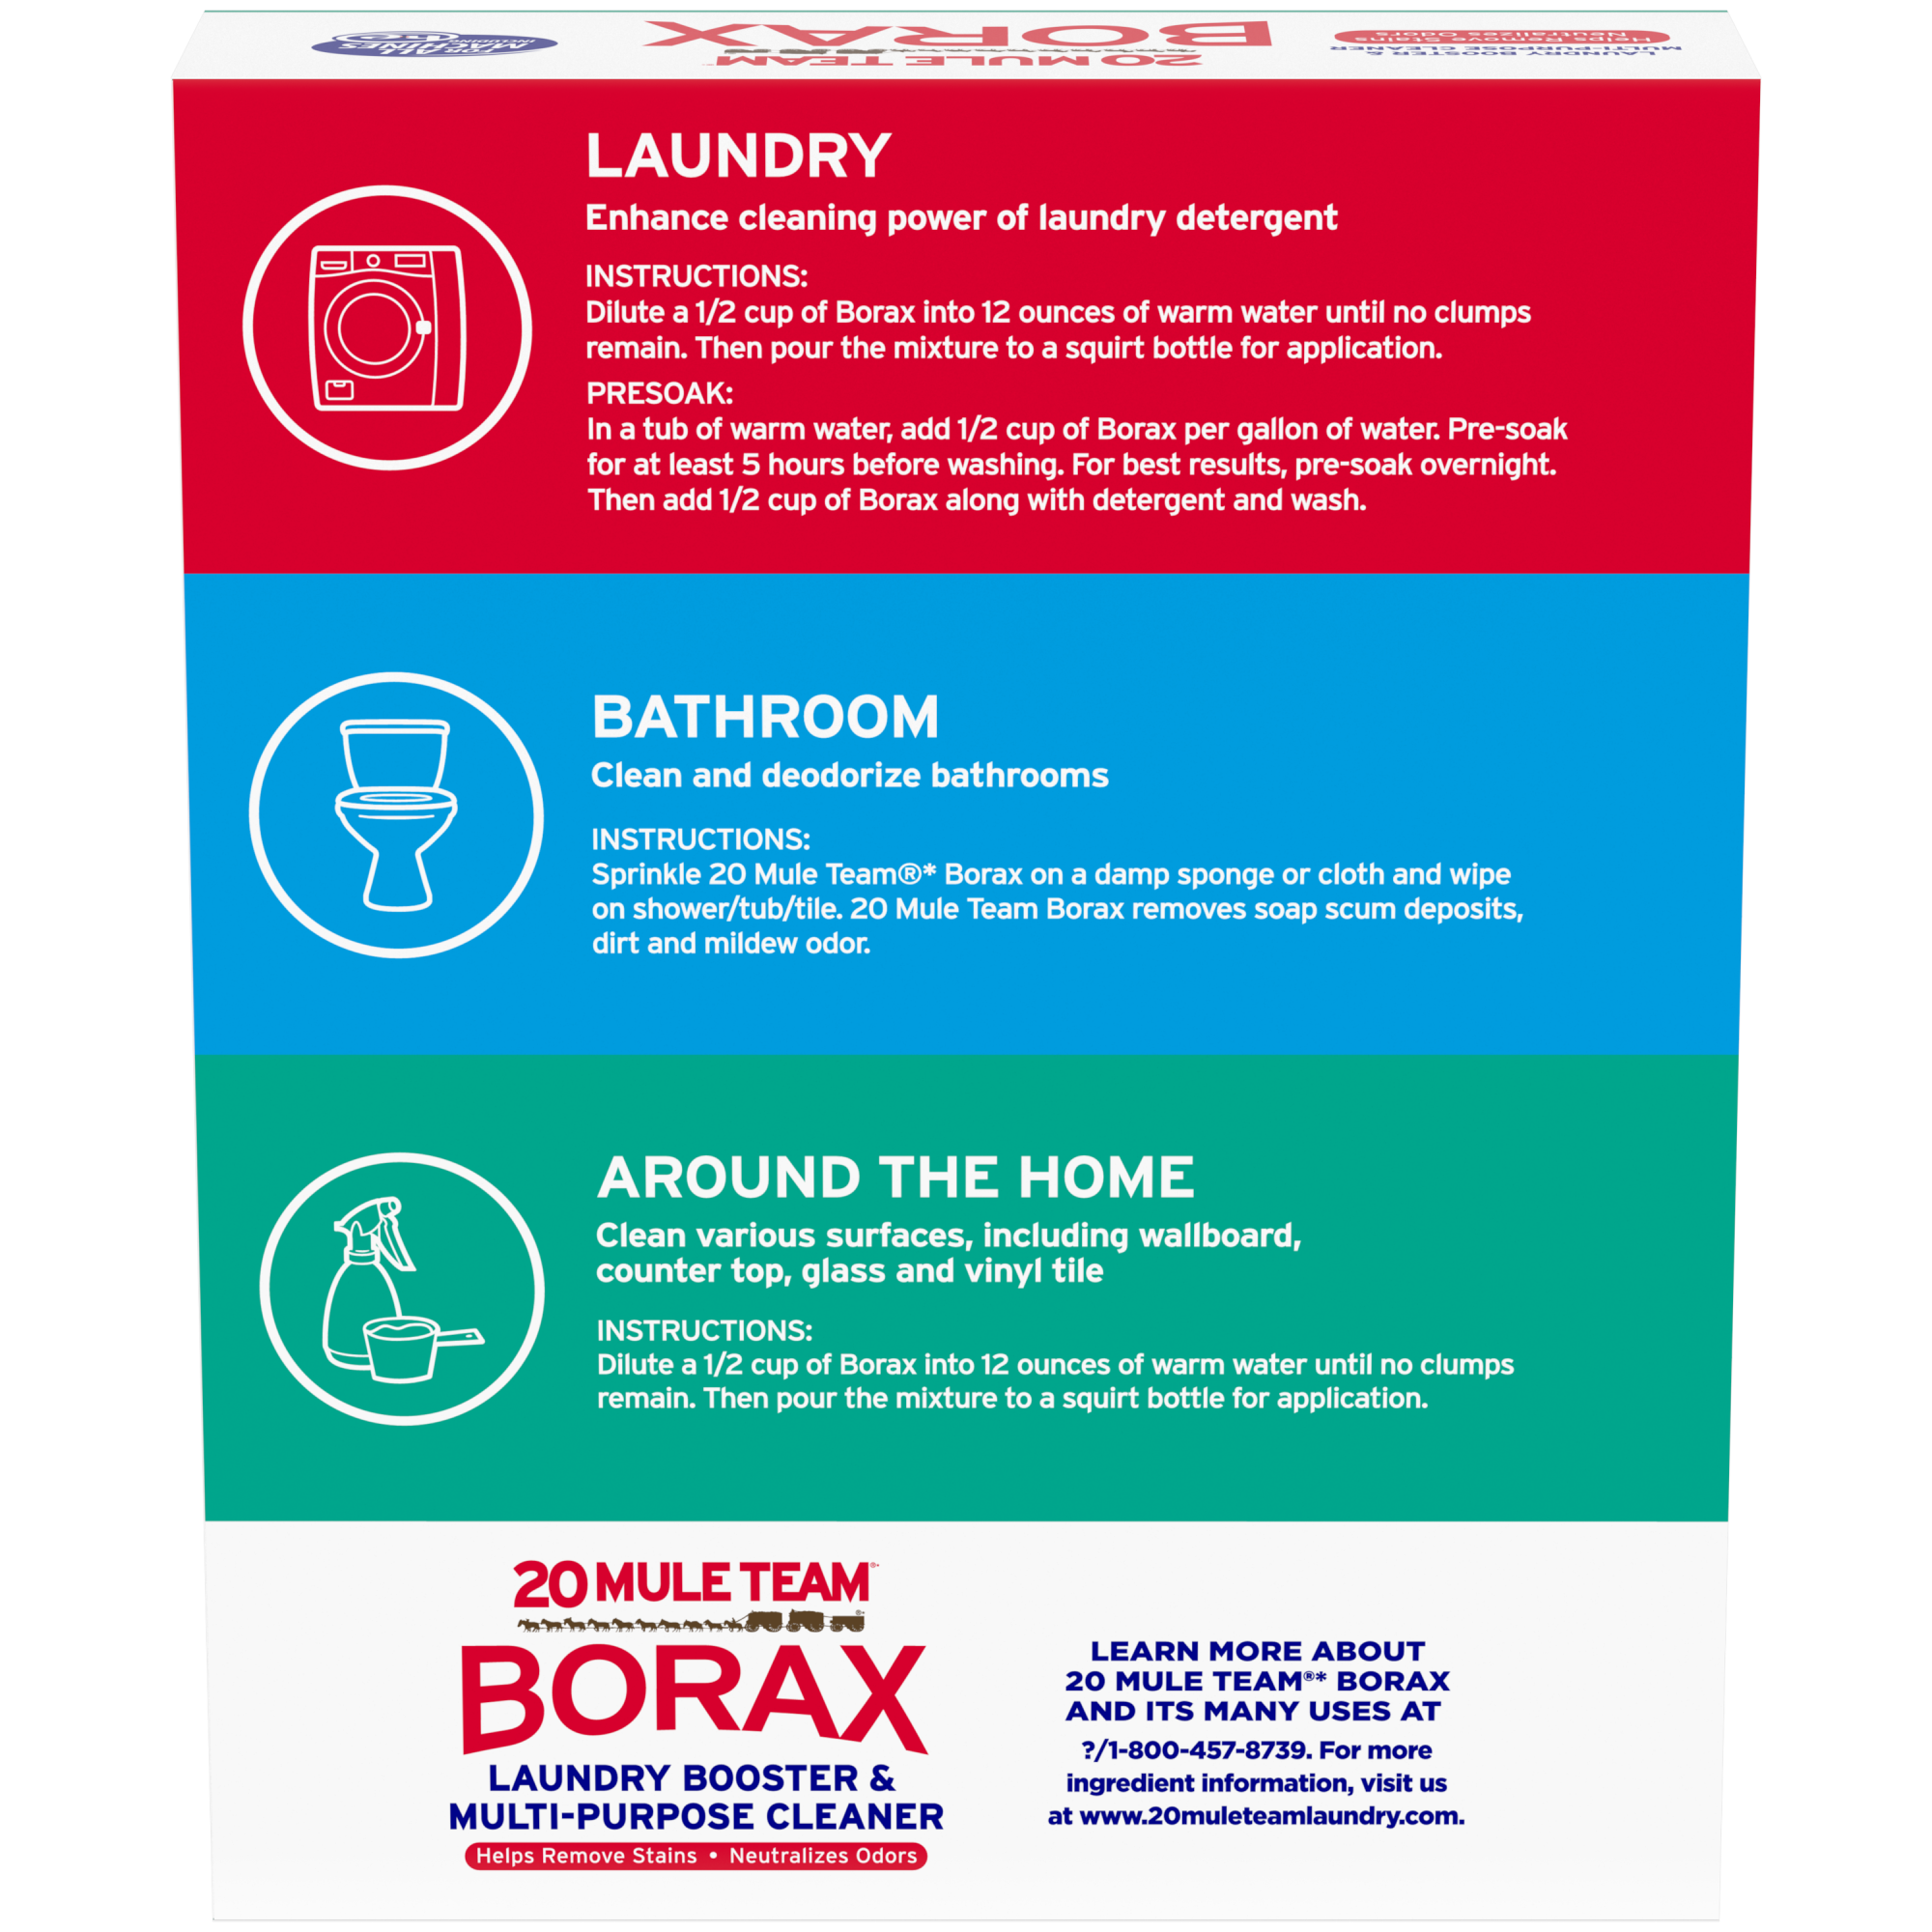 20 Mule Team All Natural Borax Laundry Detergent Booster & Multi-Purpose Household Cleaner, 65 Ounce - image 7 of 9